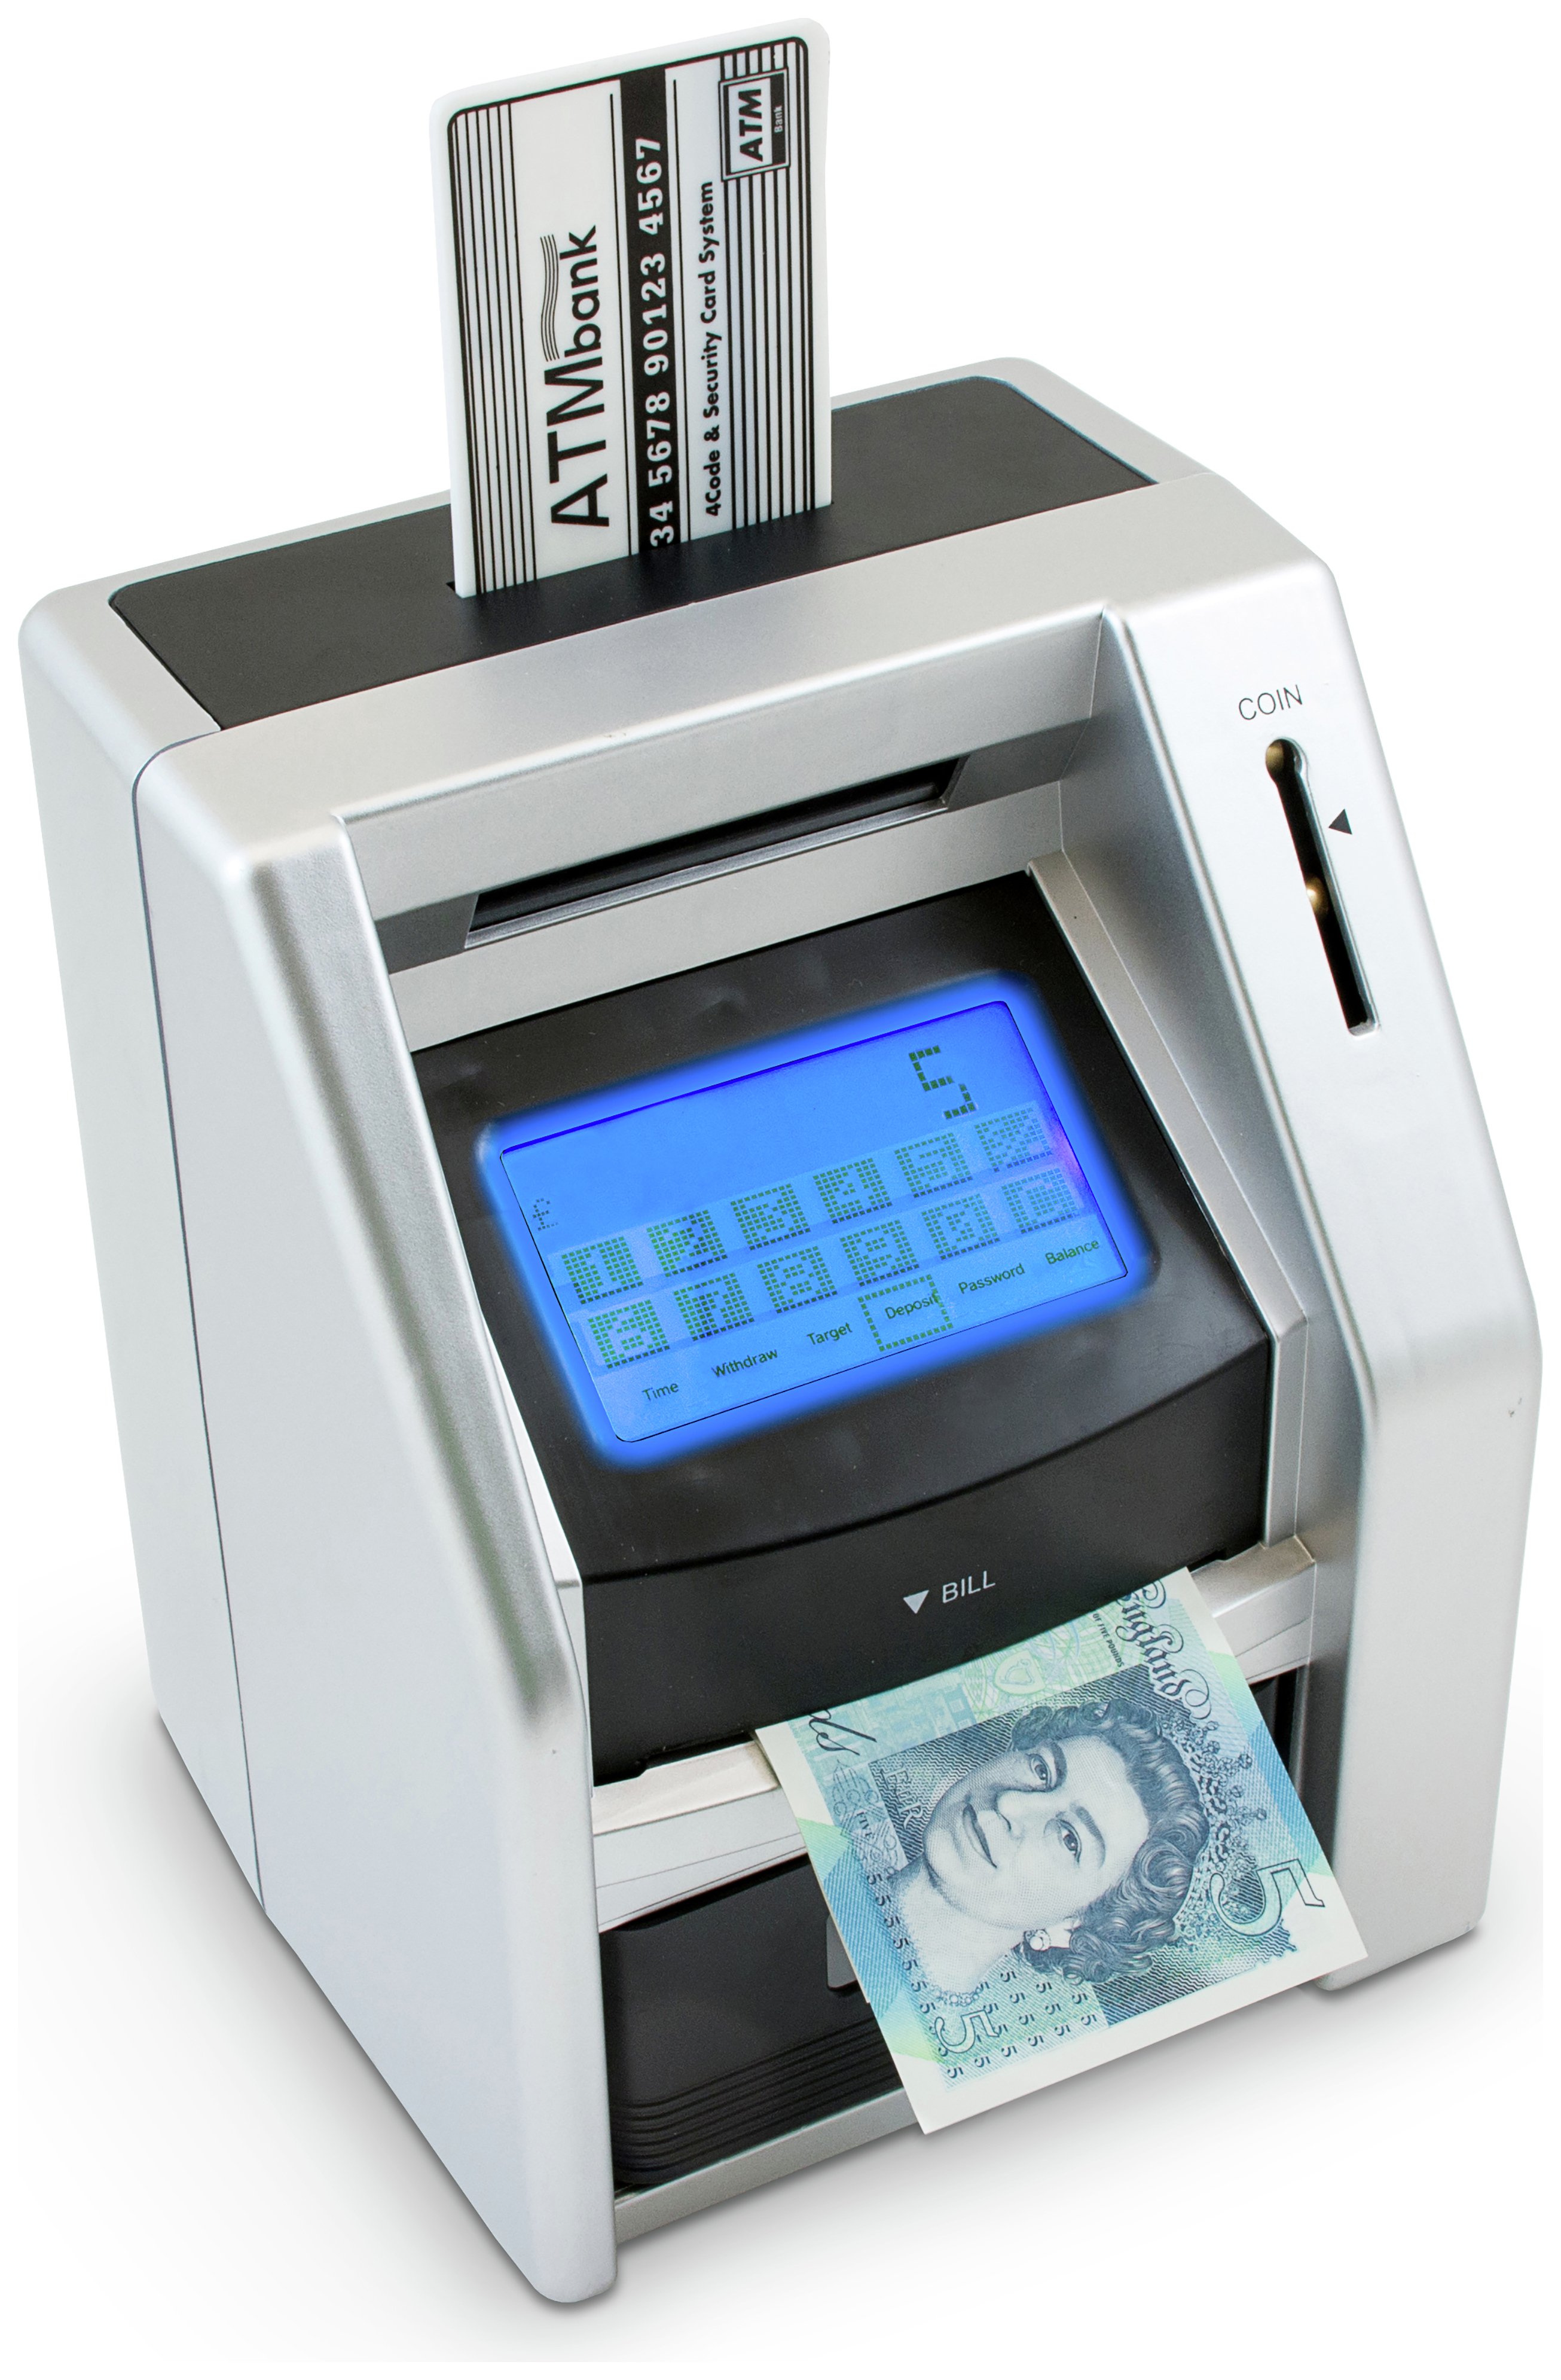 RED5 ATM Bank Touch Screen review